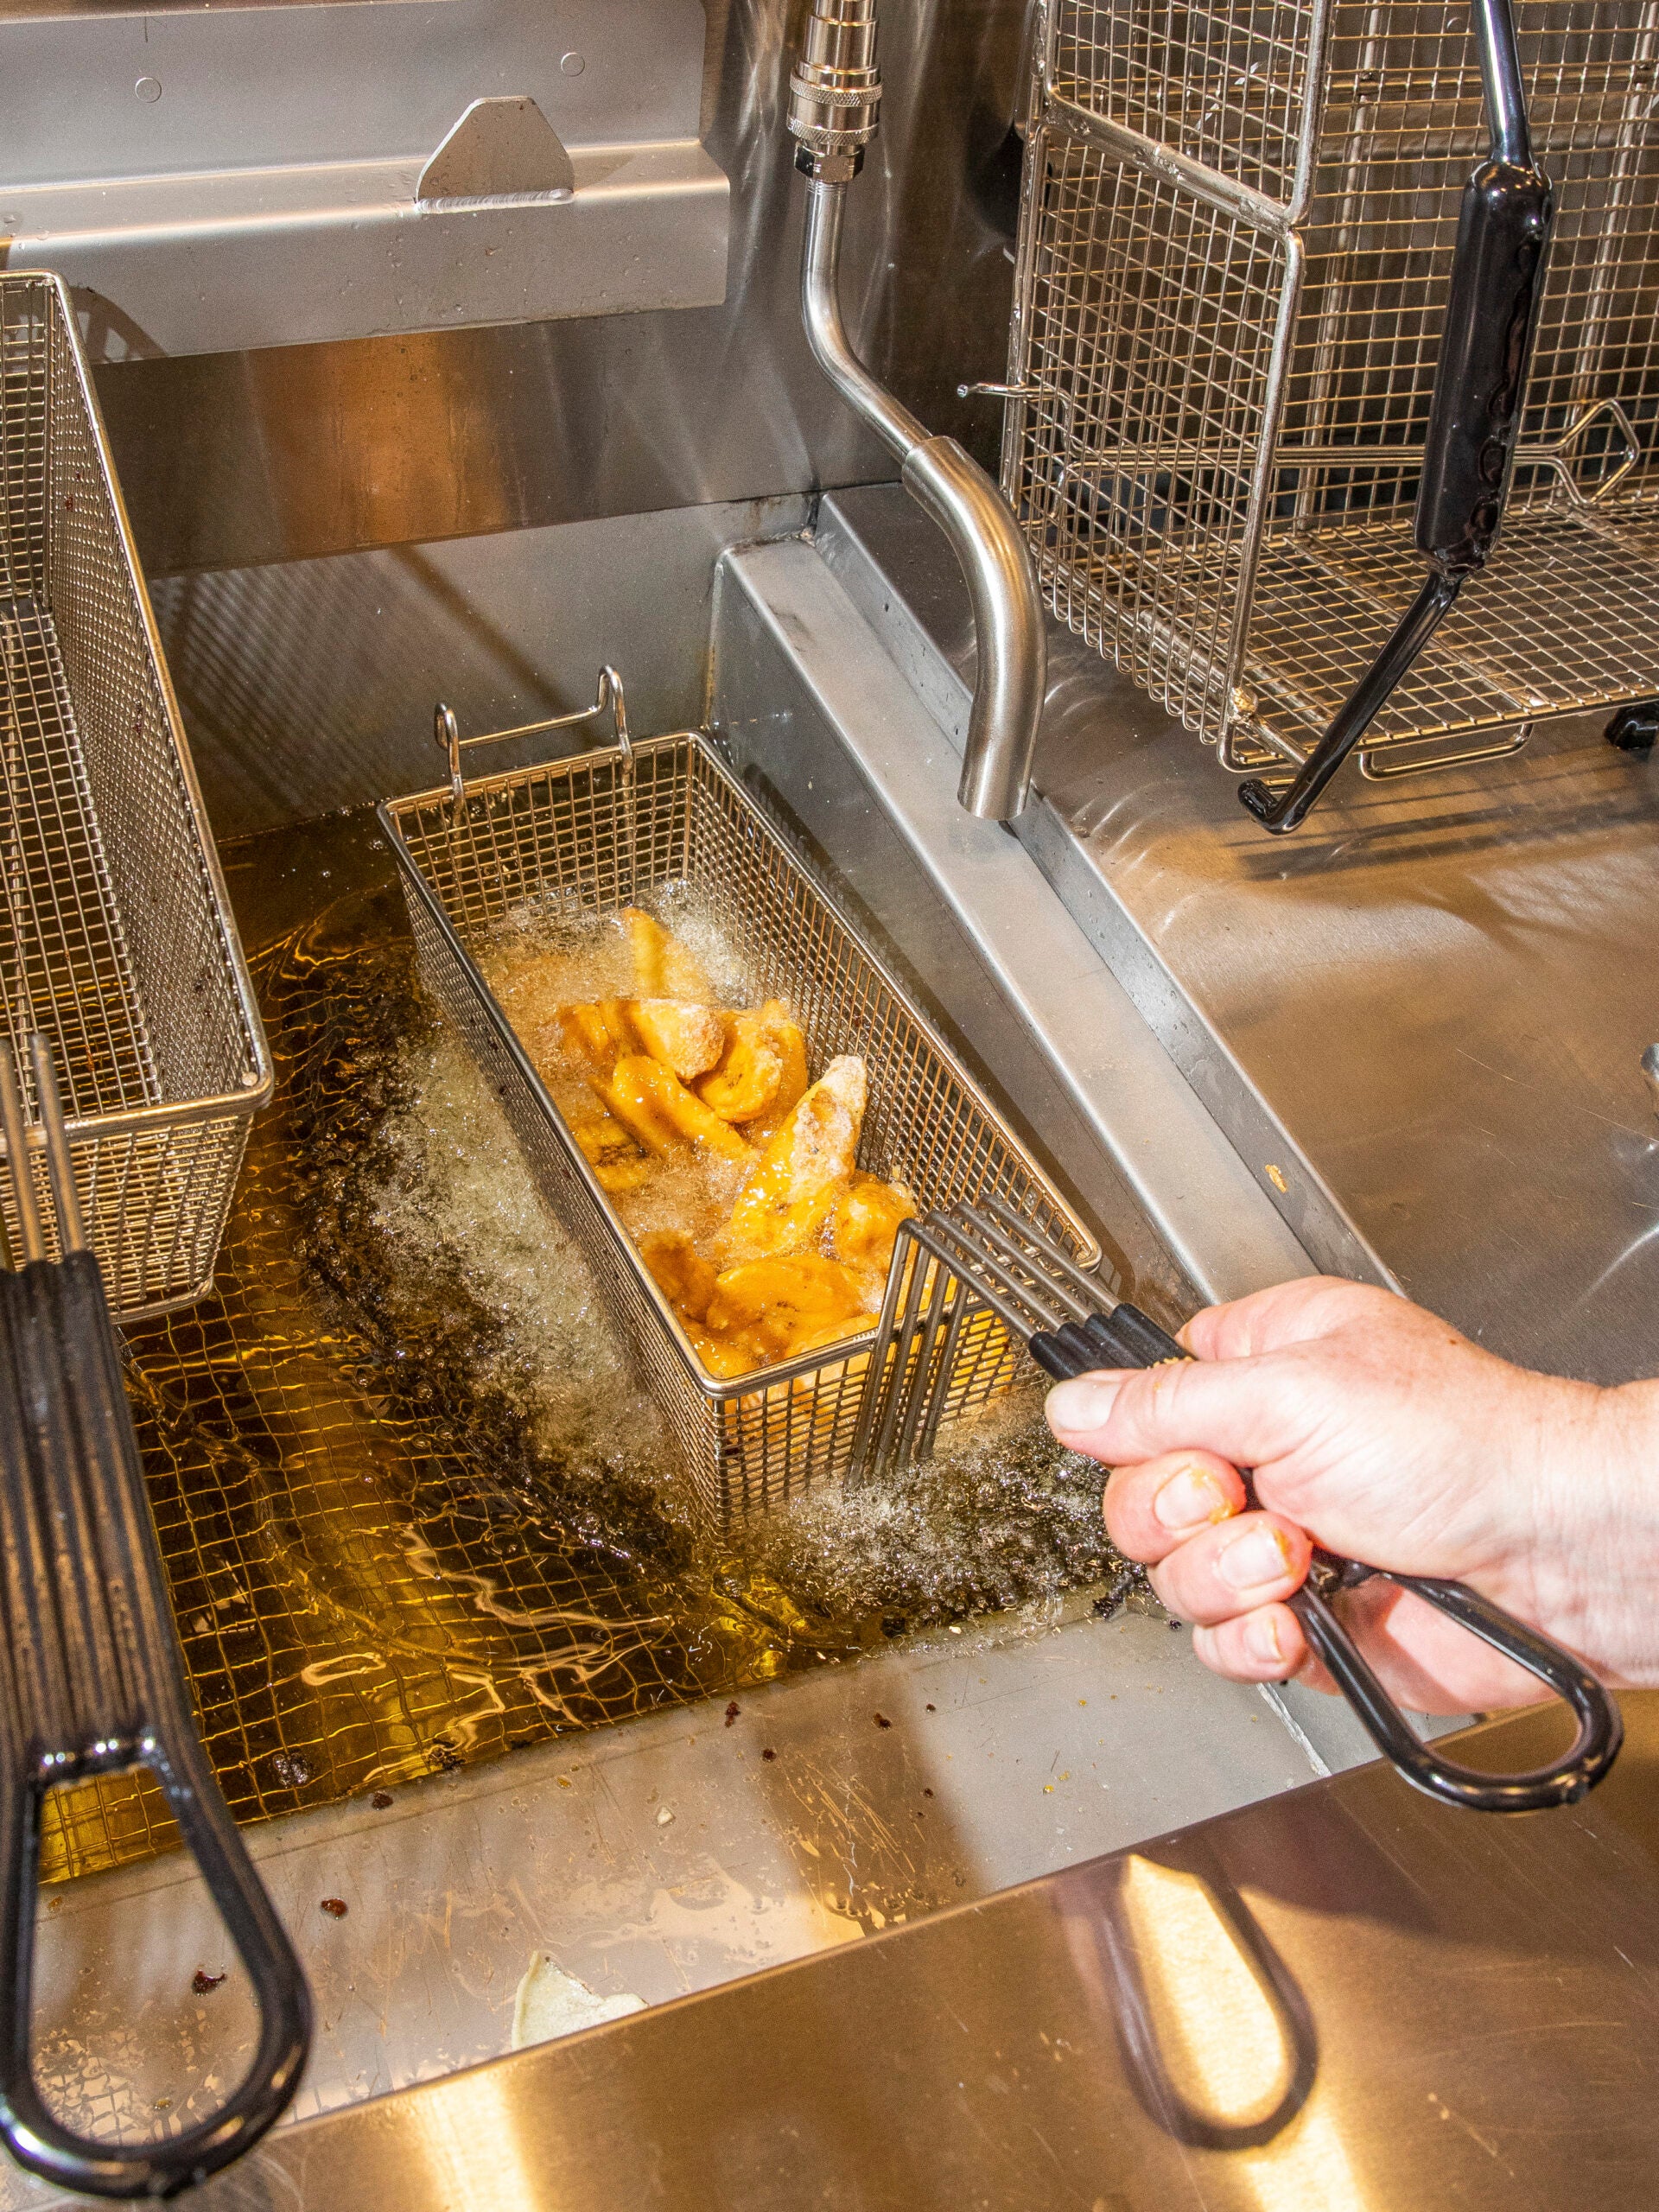 Frying plantains for the mole at the refurbished Casa Bonita in Lakewood, Colo.